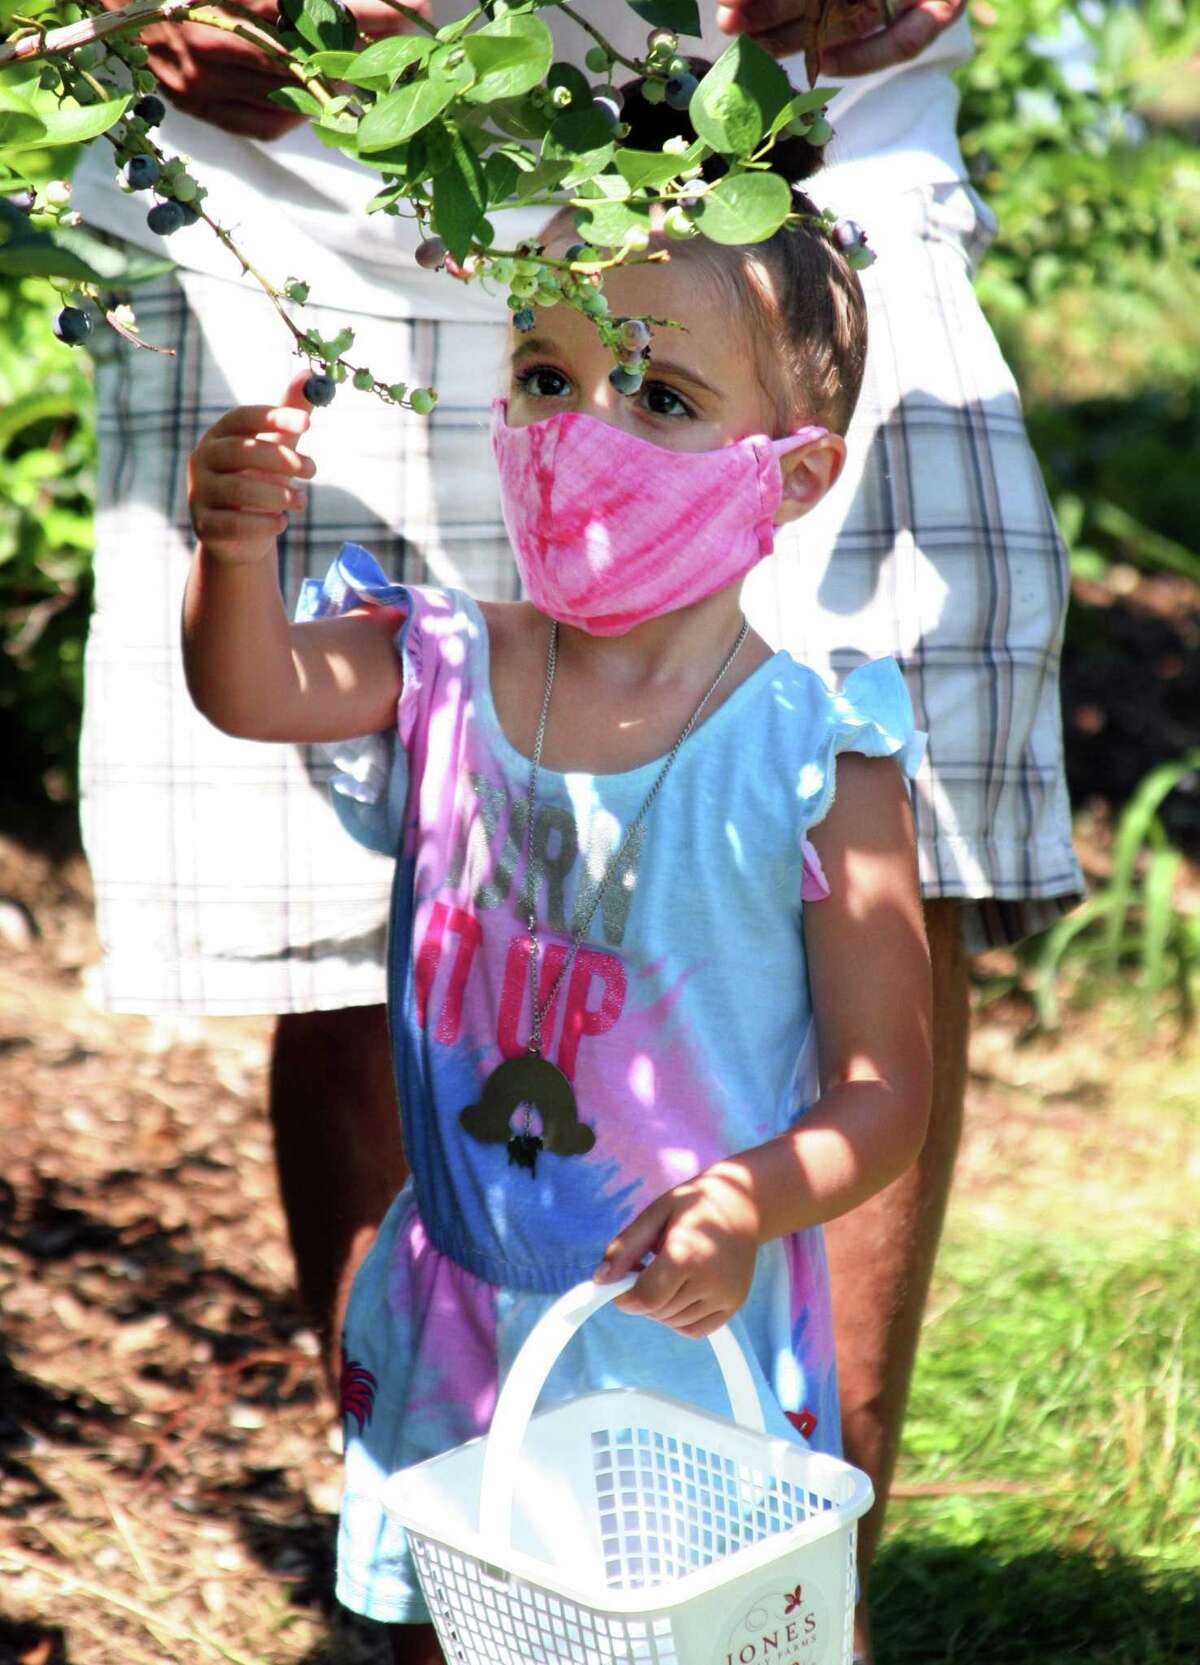 Rowan Ruggiero, 3, of Beacon Falls, picks blueberries at Jones Family Farm in Shelton, Conn., on Saturday July 18, 2020. For daily specific updates on days and hours of operation, call the Farmer Jones Crop Line at 203-929-8425.